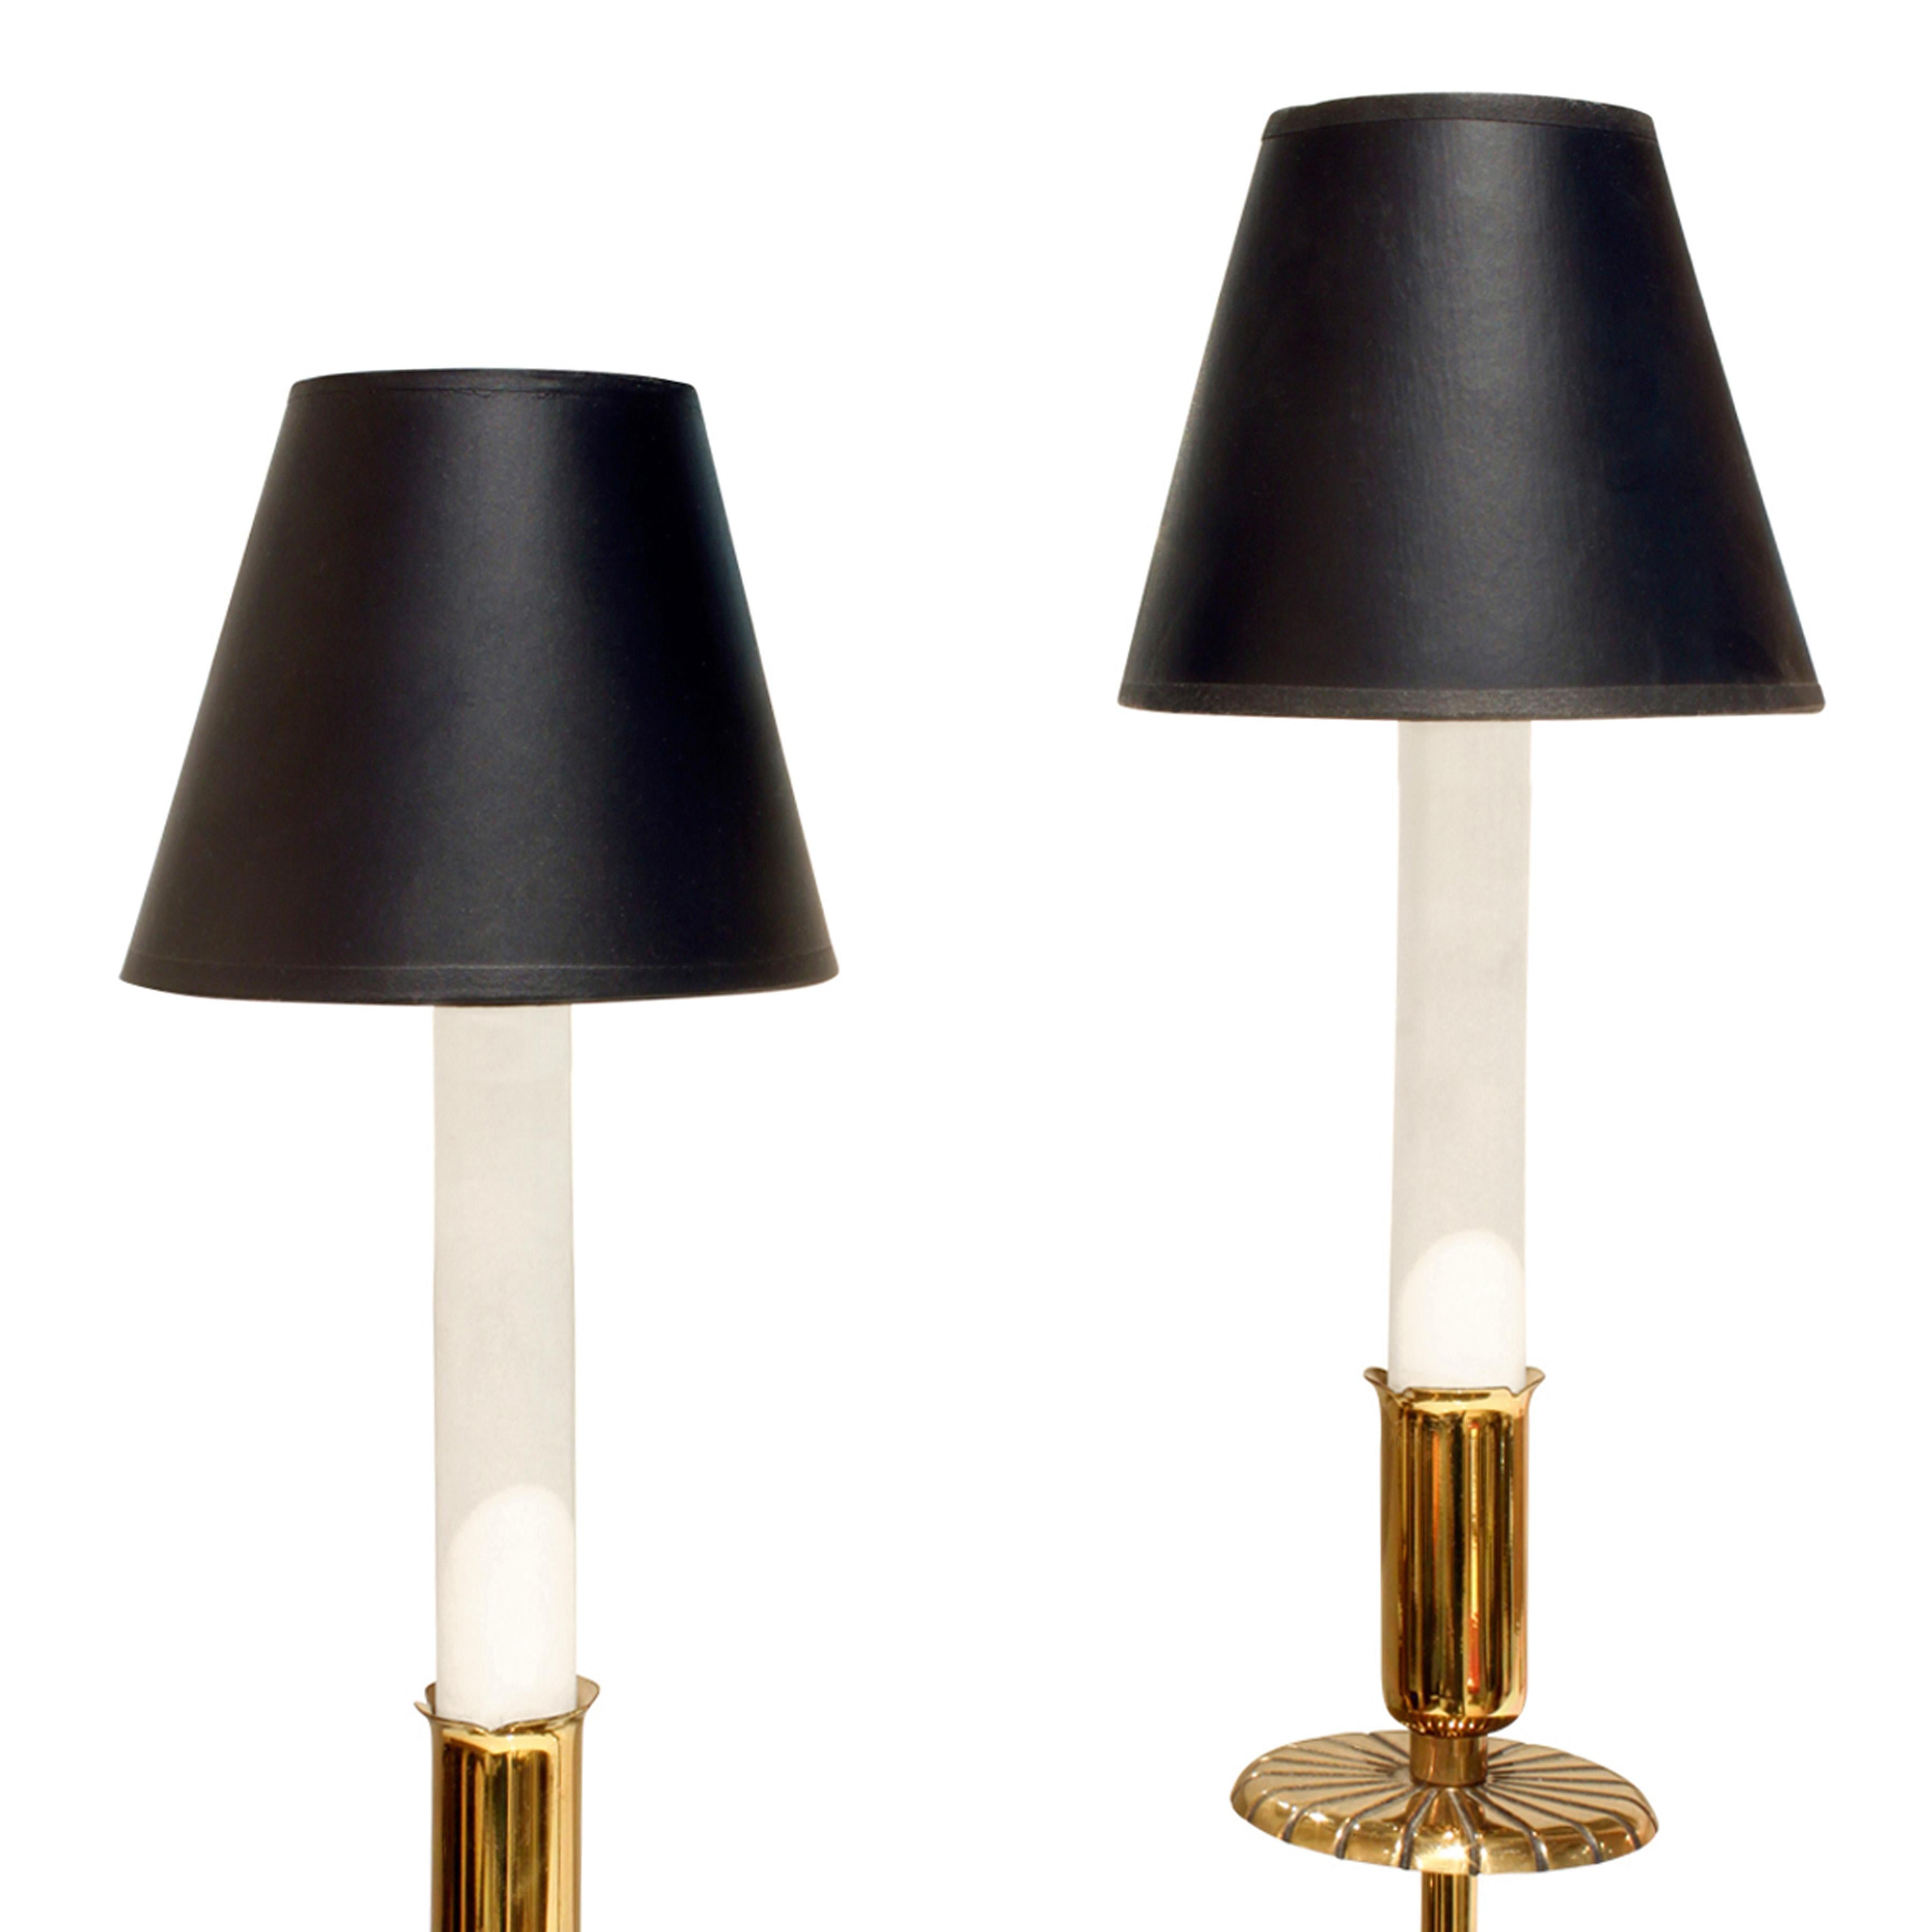 Mid-Century Modern Pair of Elegant Brass Lamps in the Manner of Tommi Parzinger 1950s For Sale